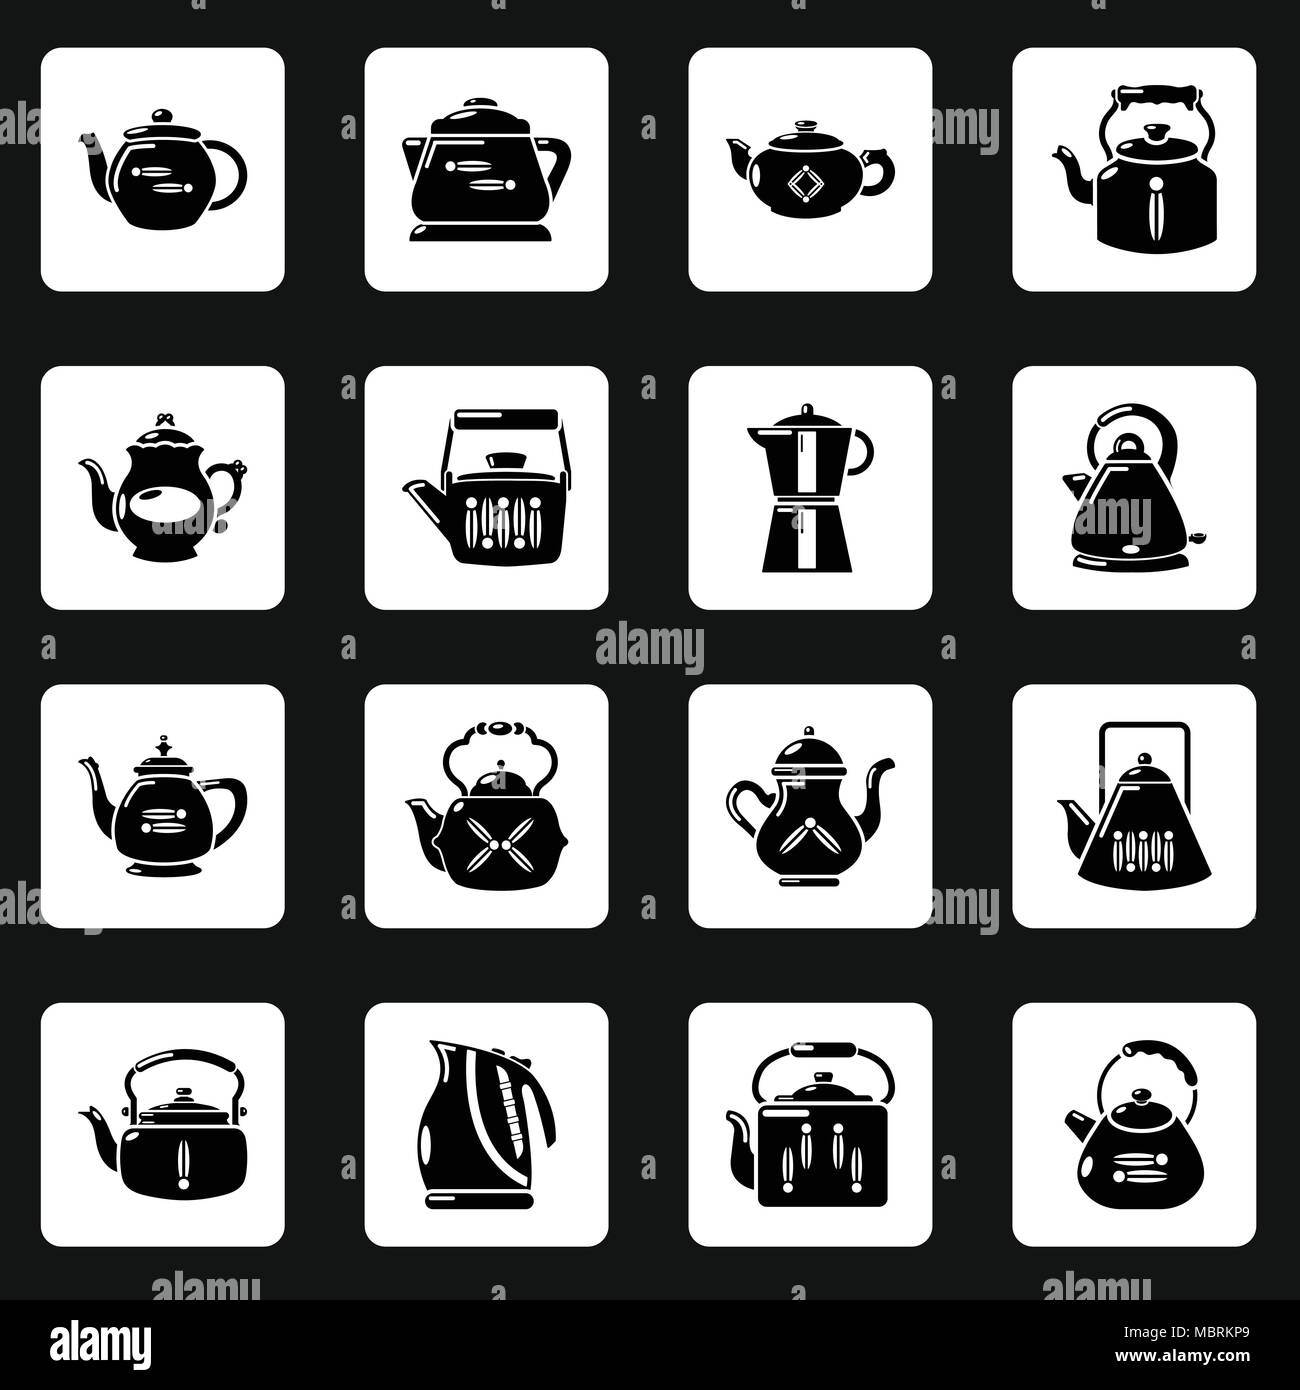 Teapot icons set, simple style Stock Vector